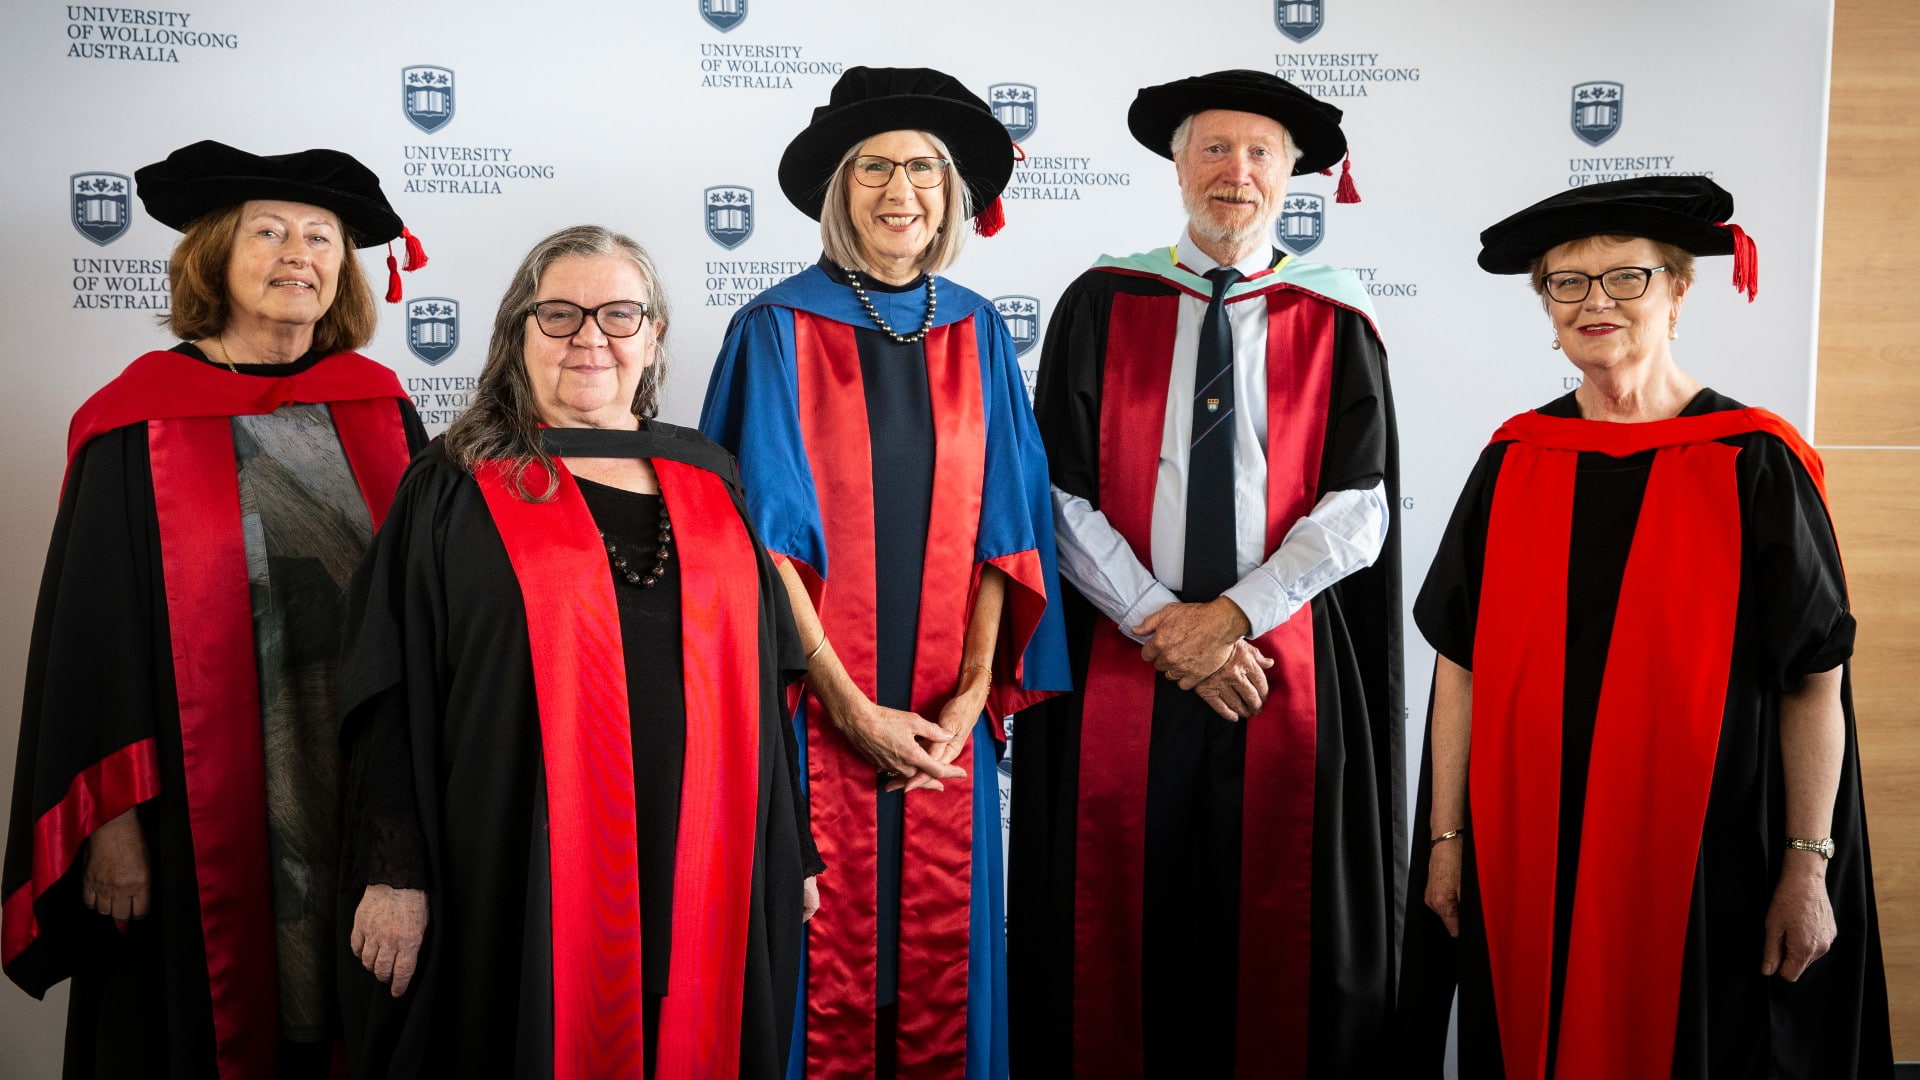 SIM - UOW Graduates Challenged To Seek Out The 3 A's